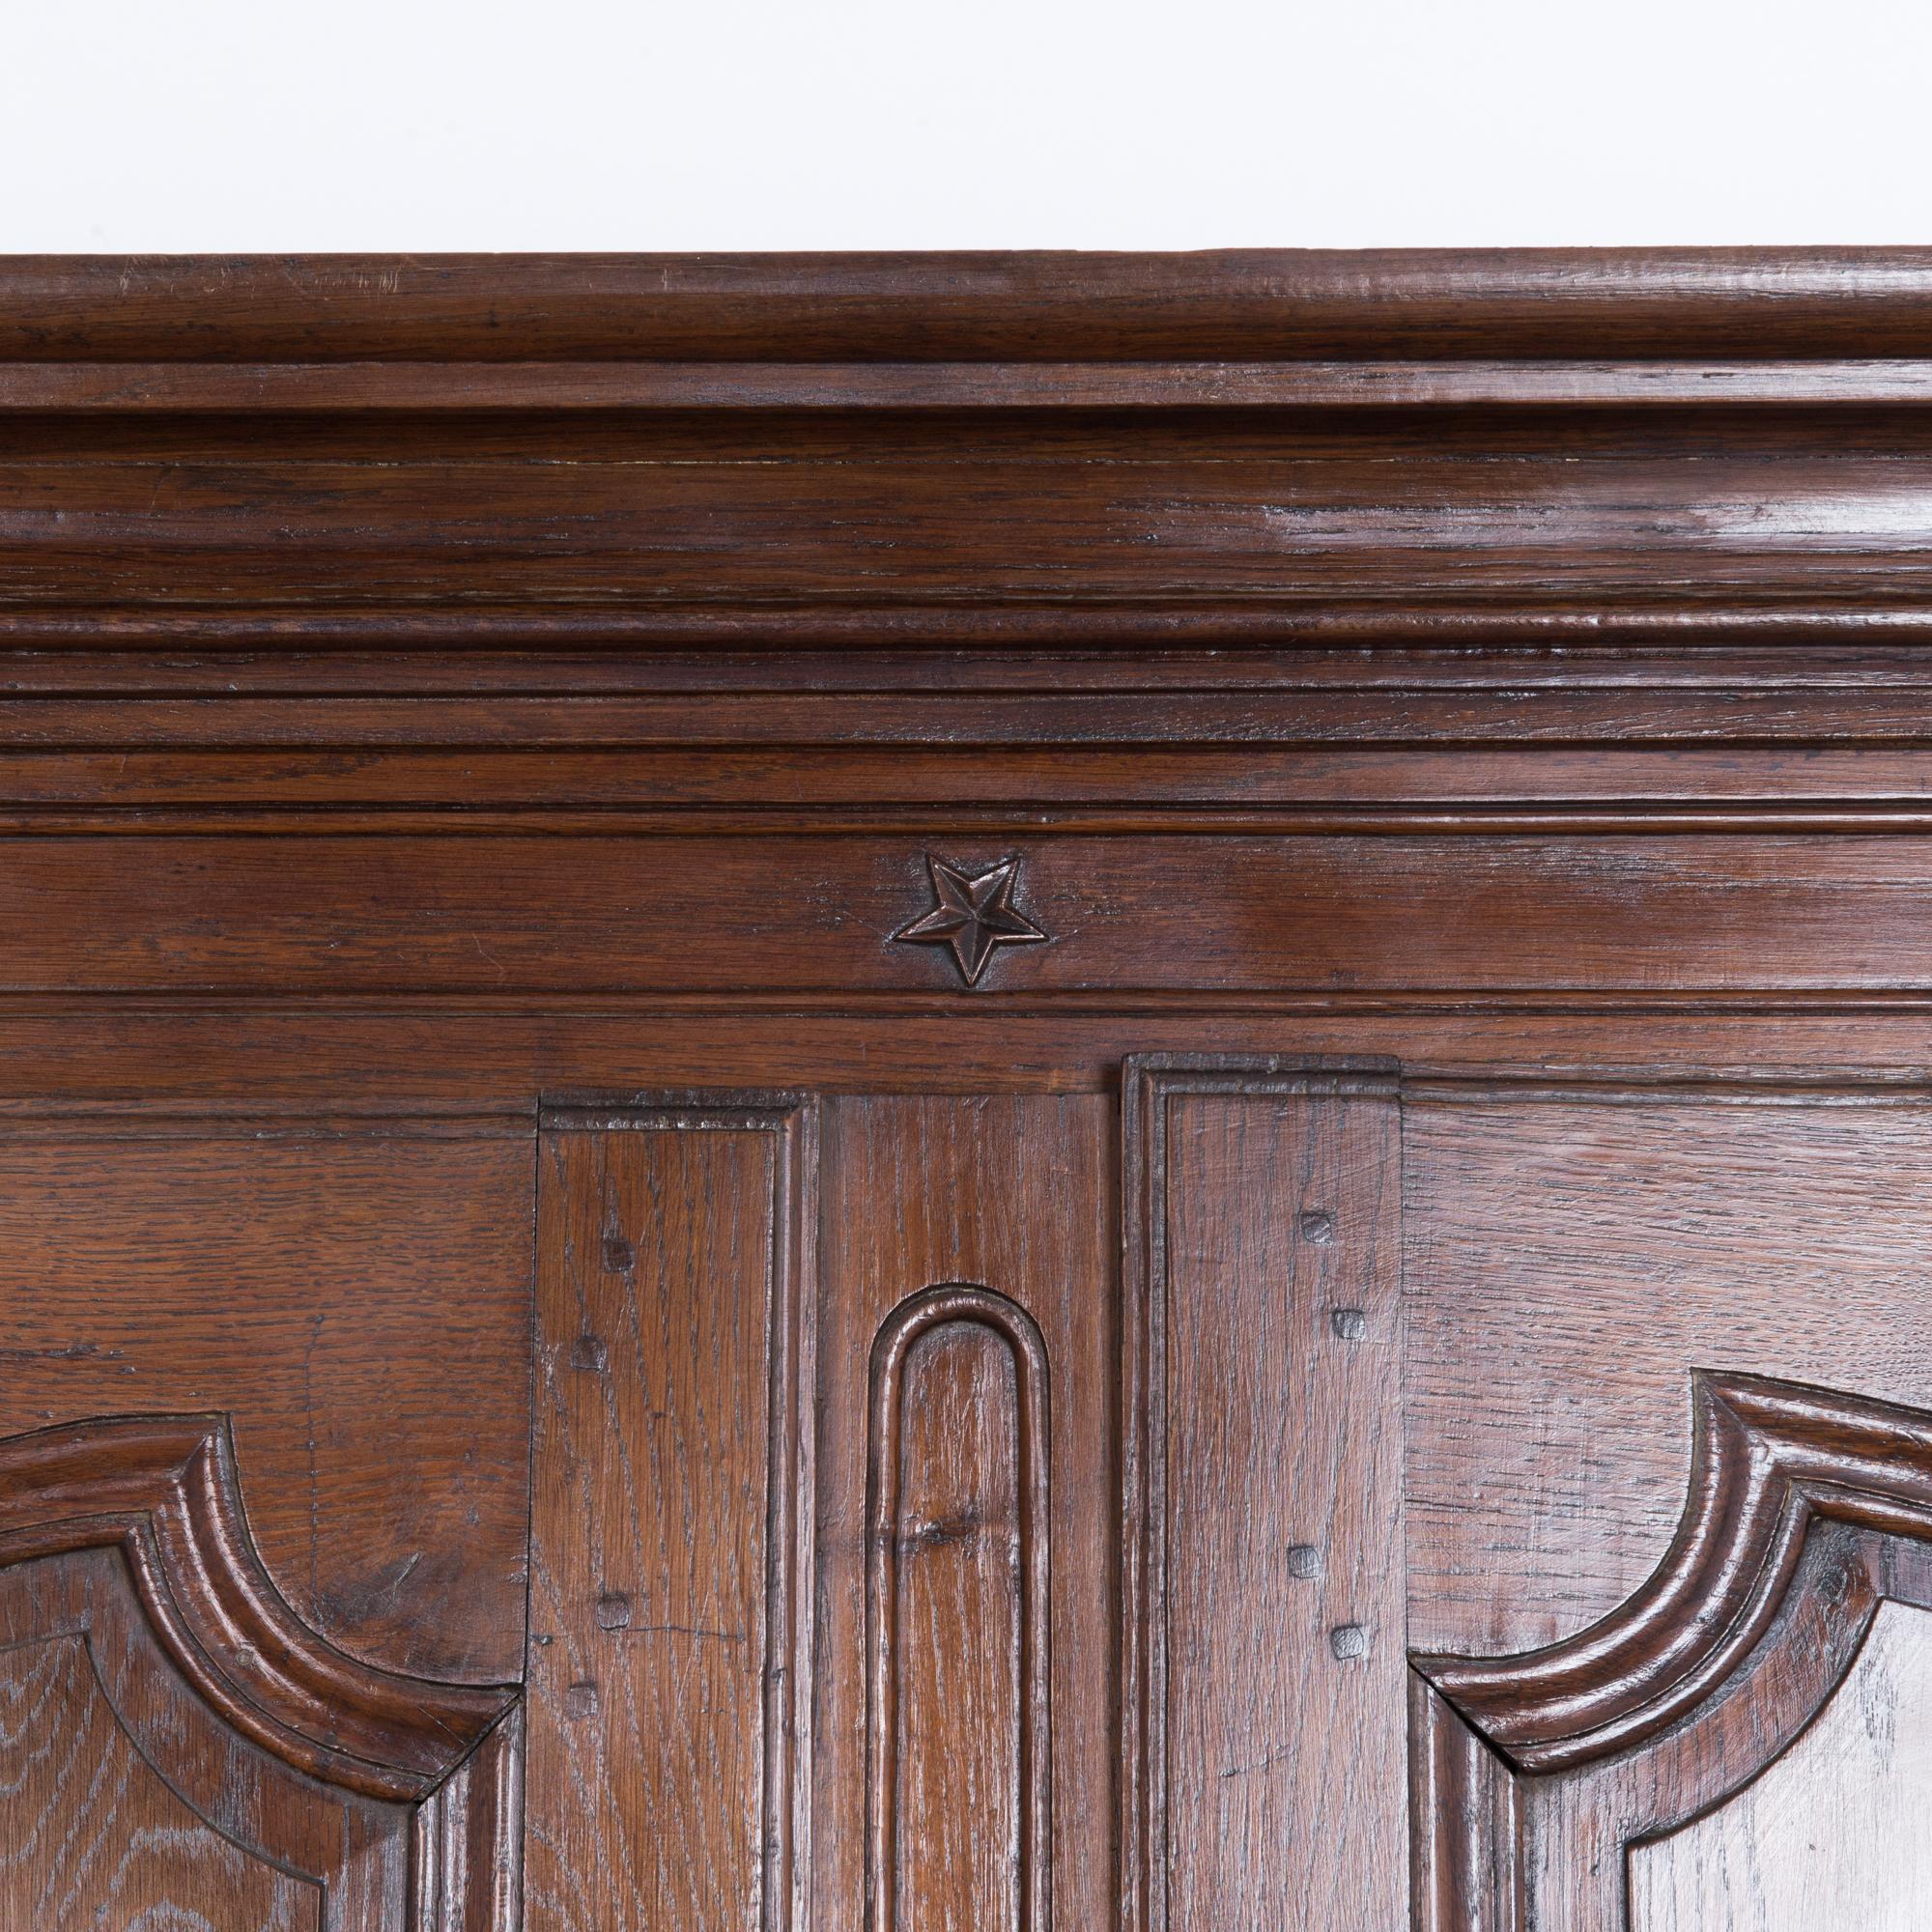 19th Century Turn of the Century Wooden Armoire with Original Patina